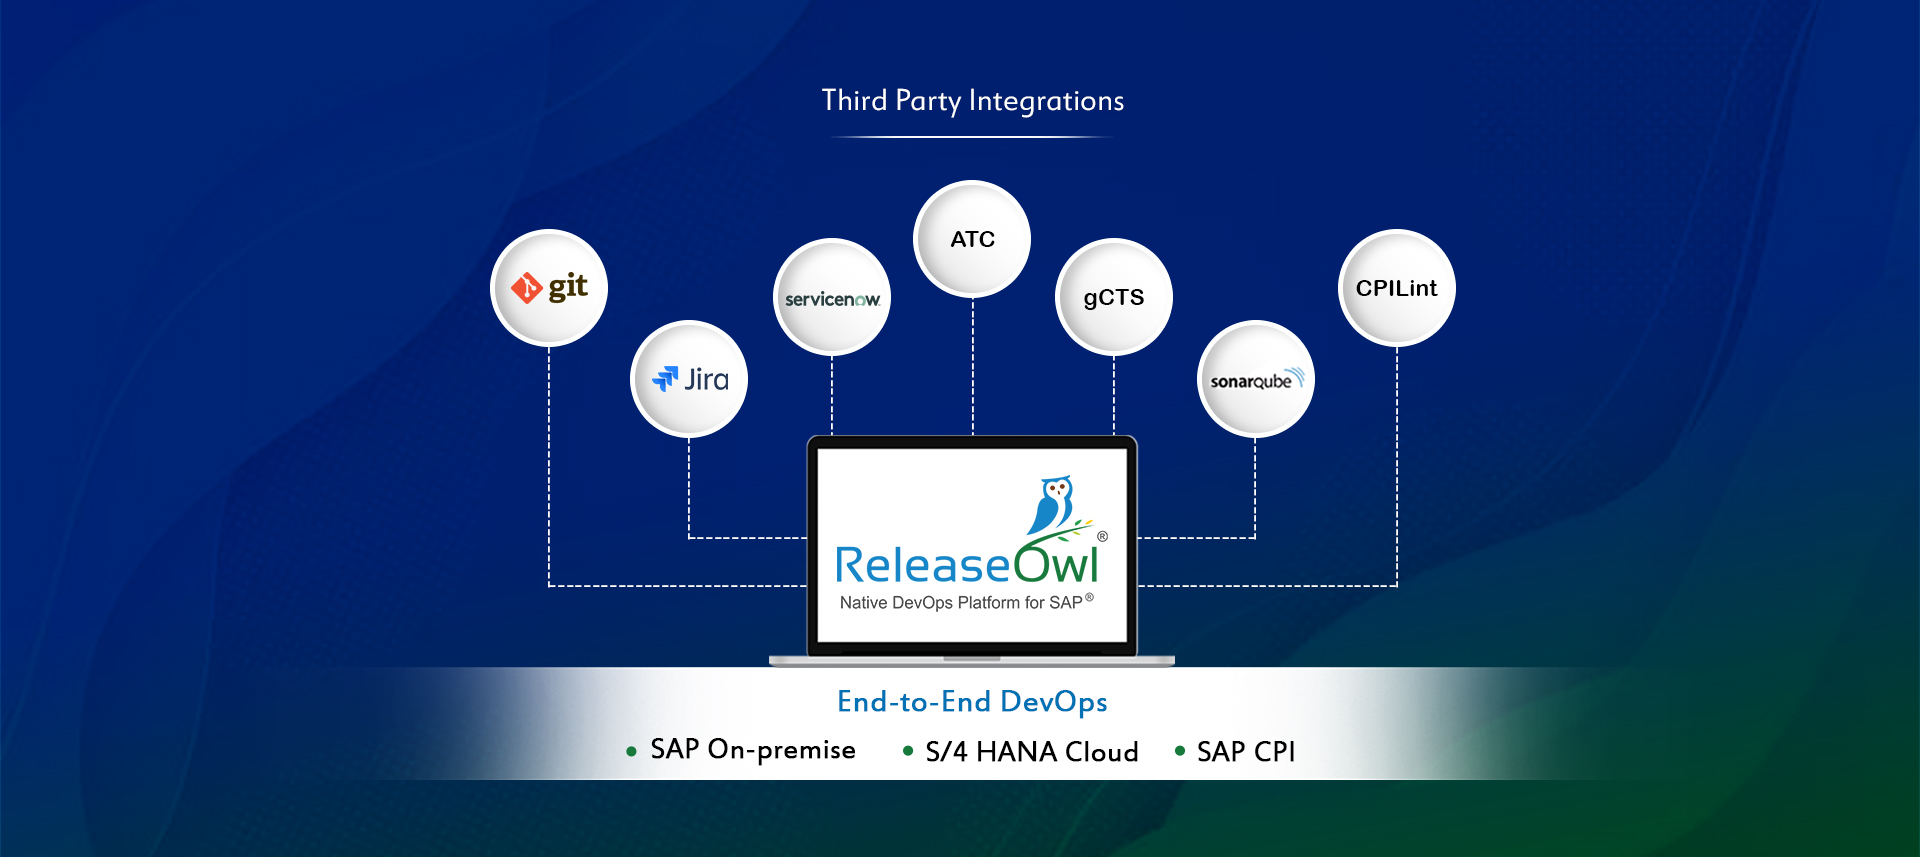 Third Party Integrations